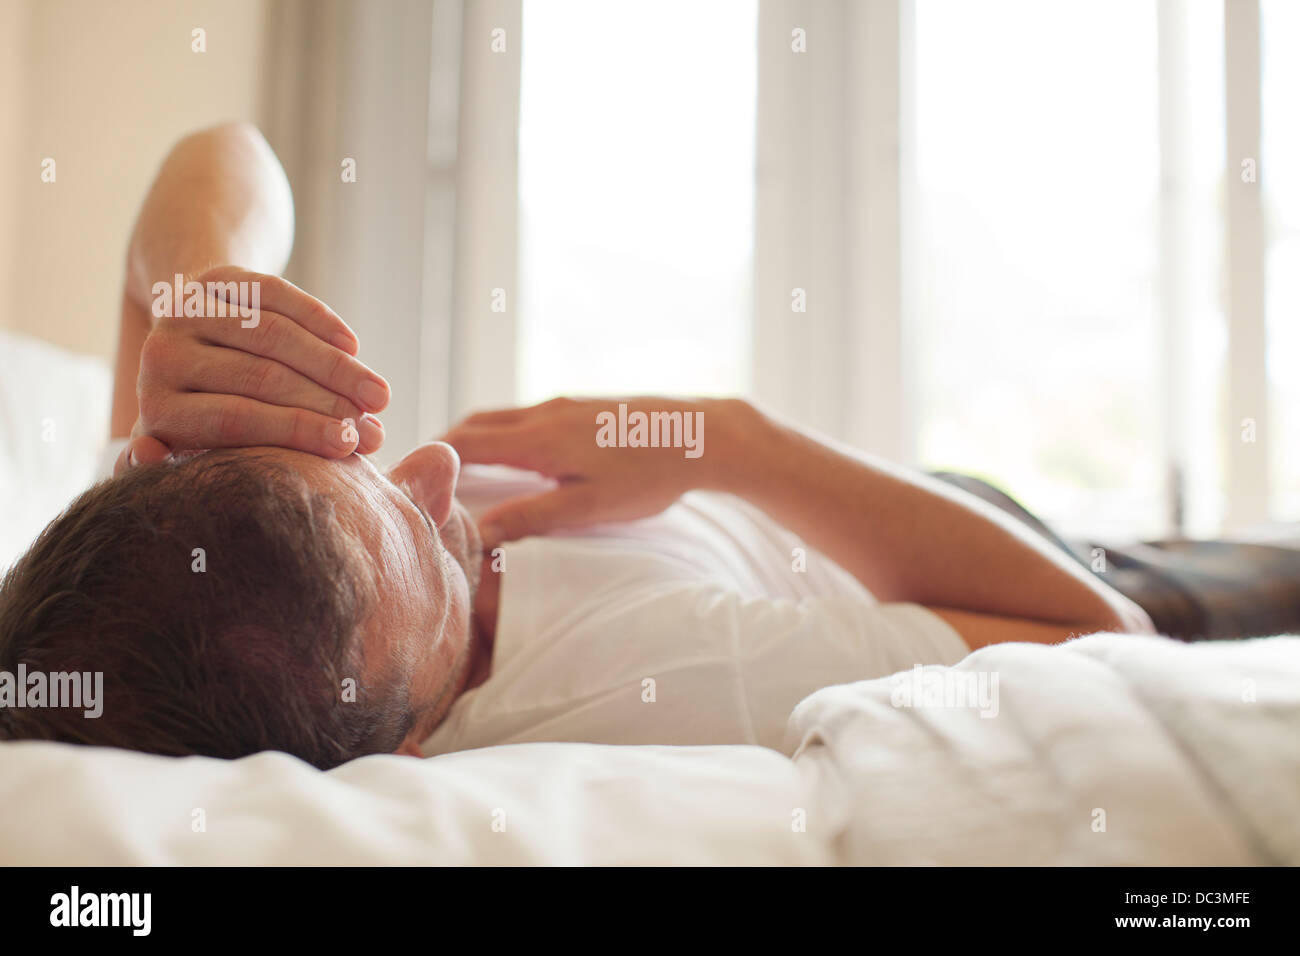 Man laying in bed with head in hands Banque D'Images